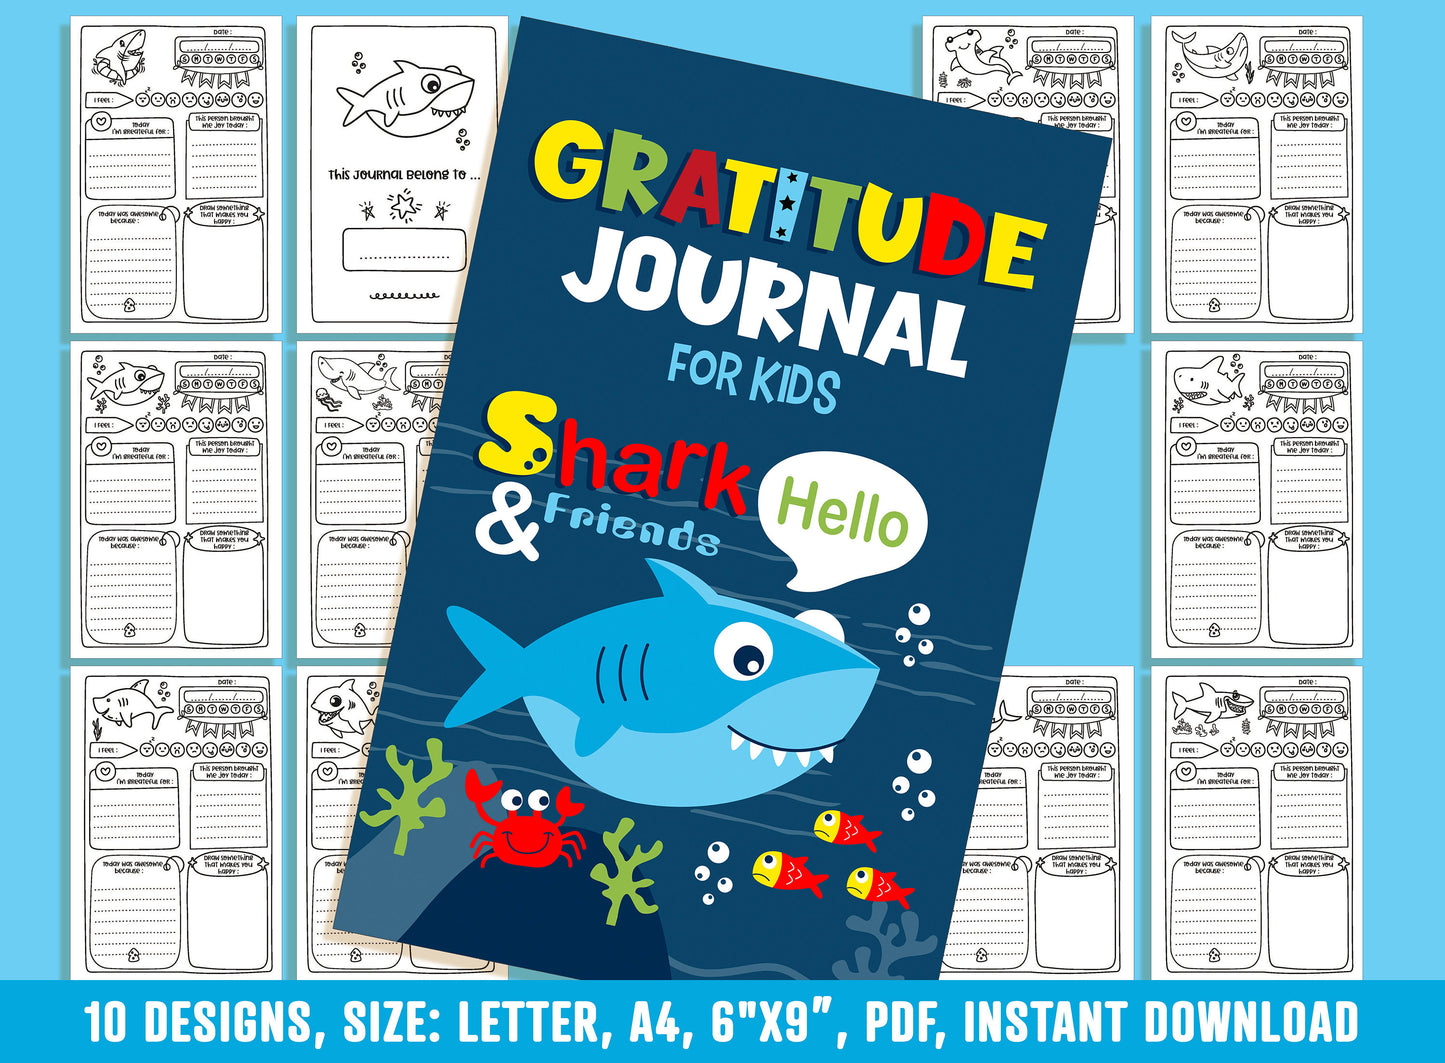 Gratitude Journal for Kids - Shark & Friends, Daily Journal Prompts, 10 Designs, Size: Letter 8.5"x11", A4, 6"x9", Printable PDF, Boys/Girls